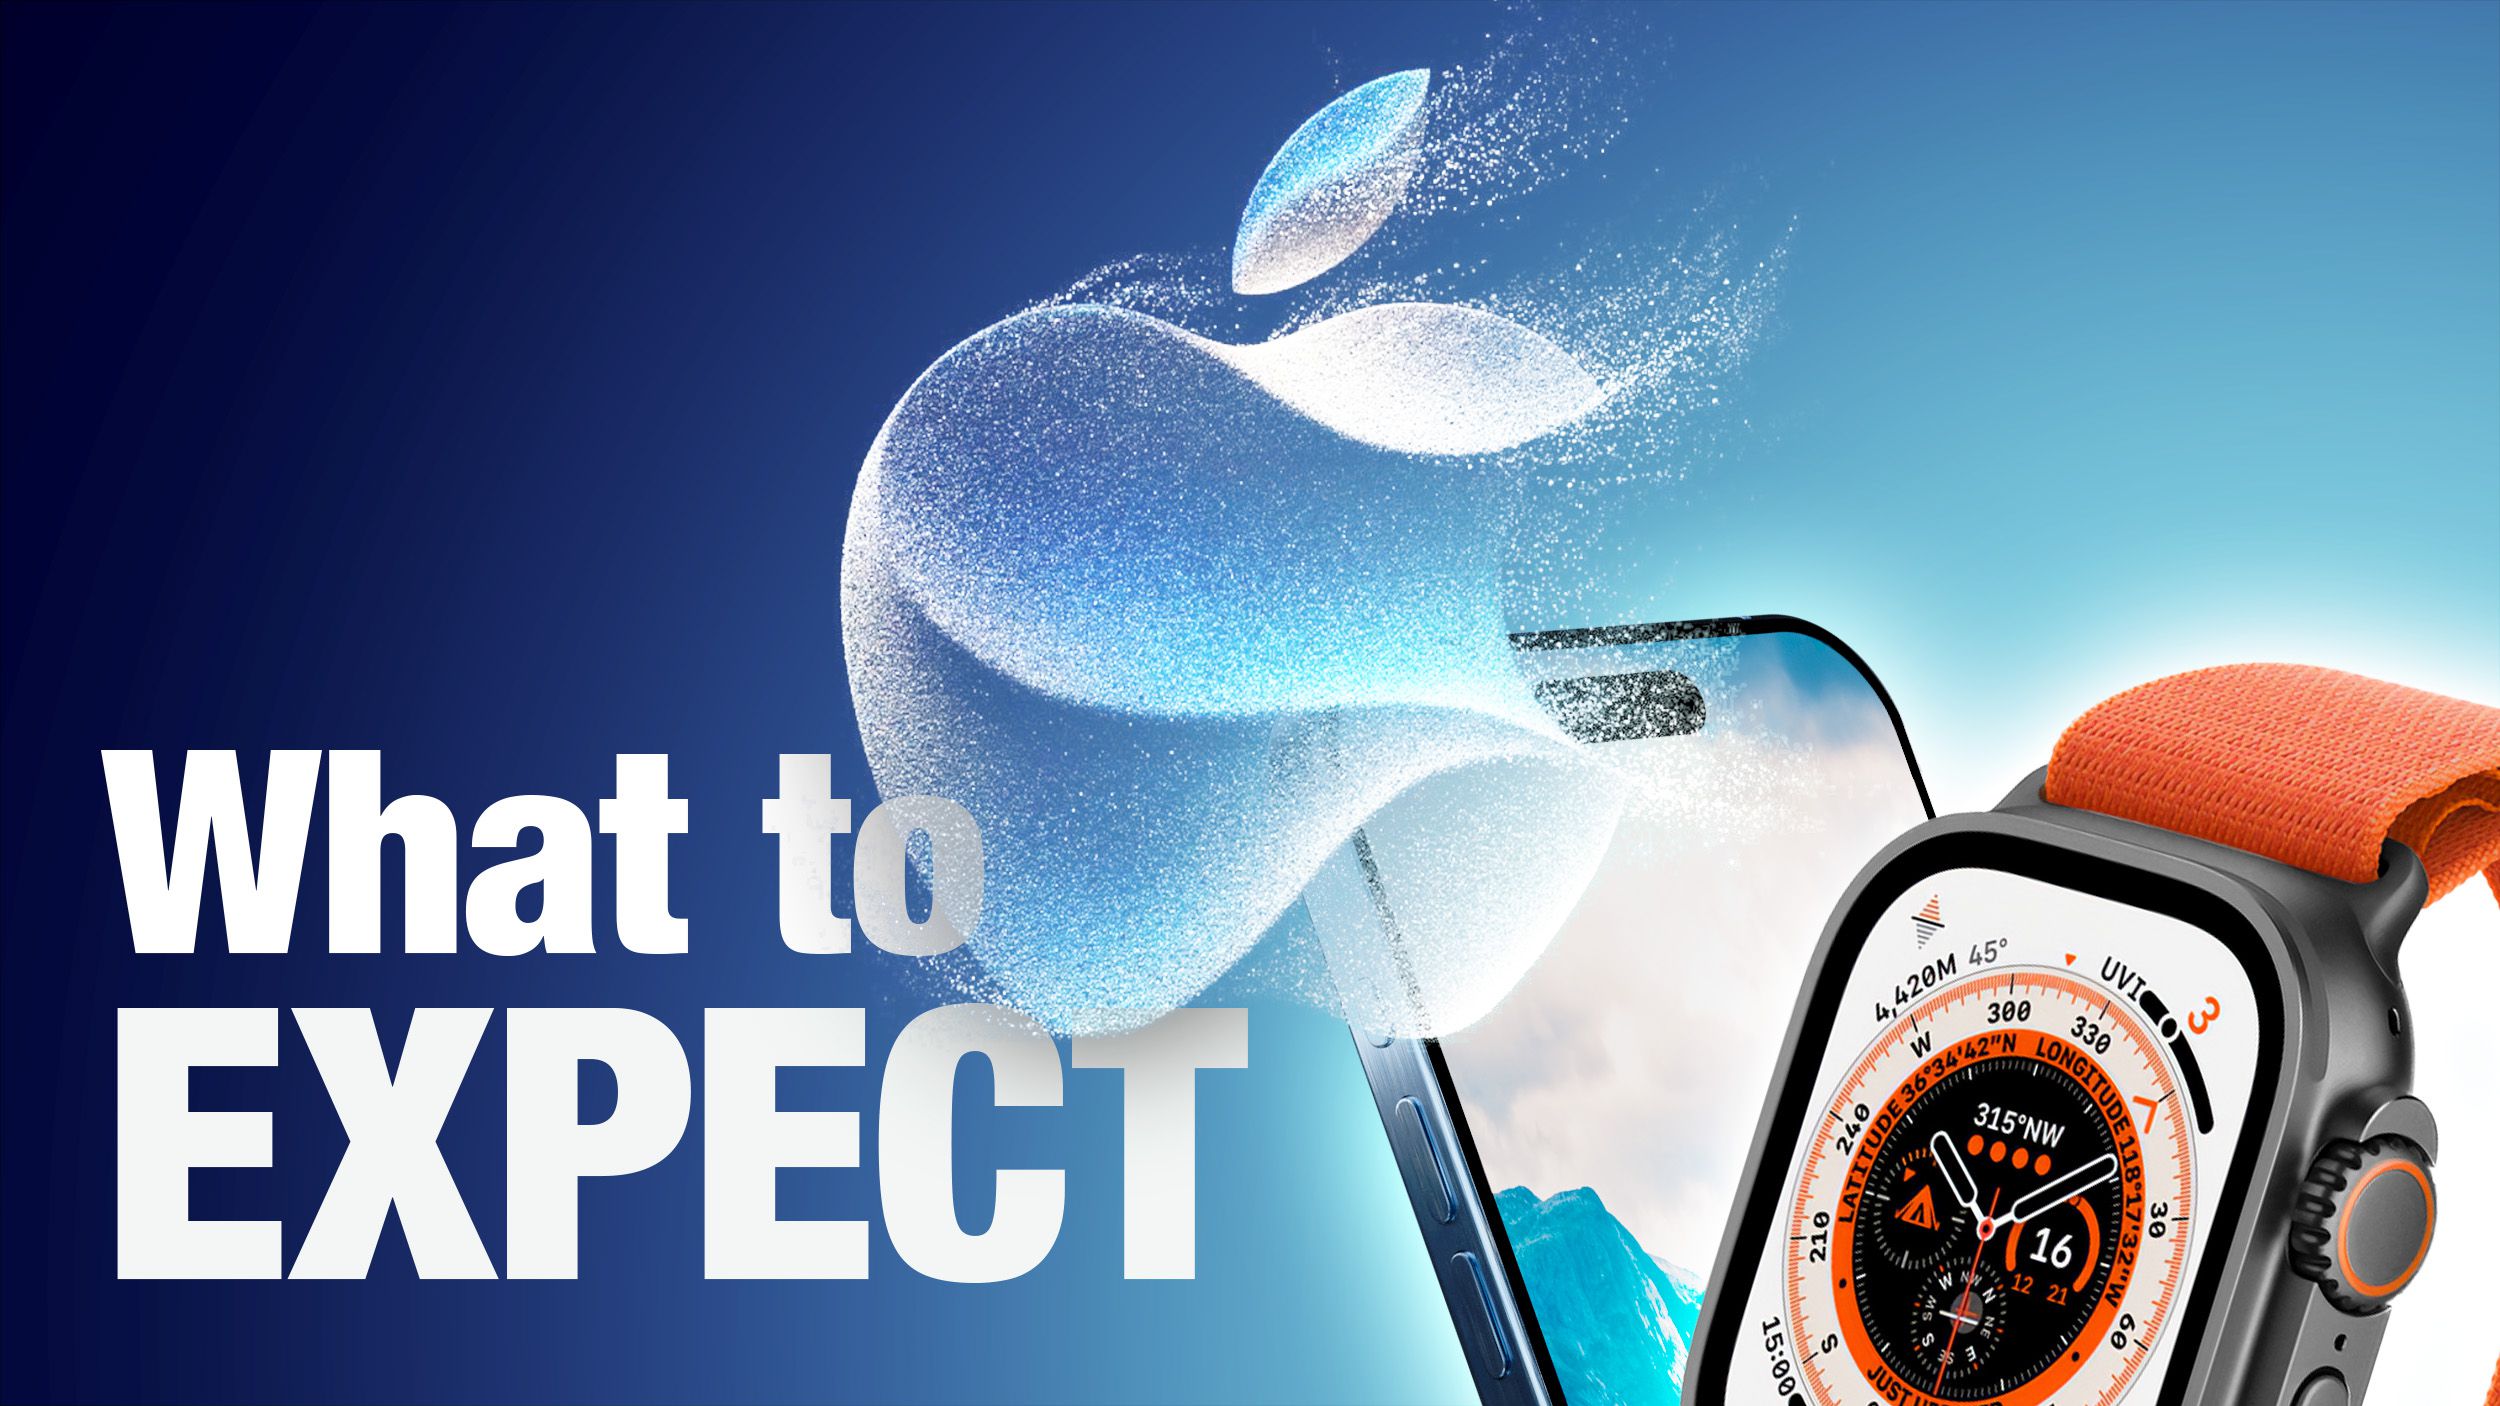 What to Expect at Apples Wonderlust Event Thumb 1.jpg